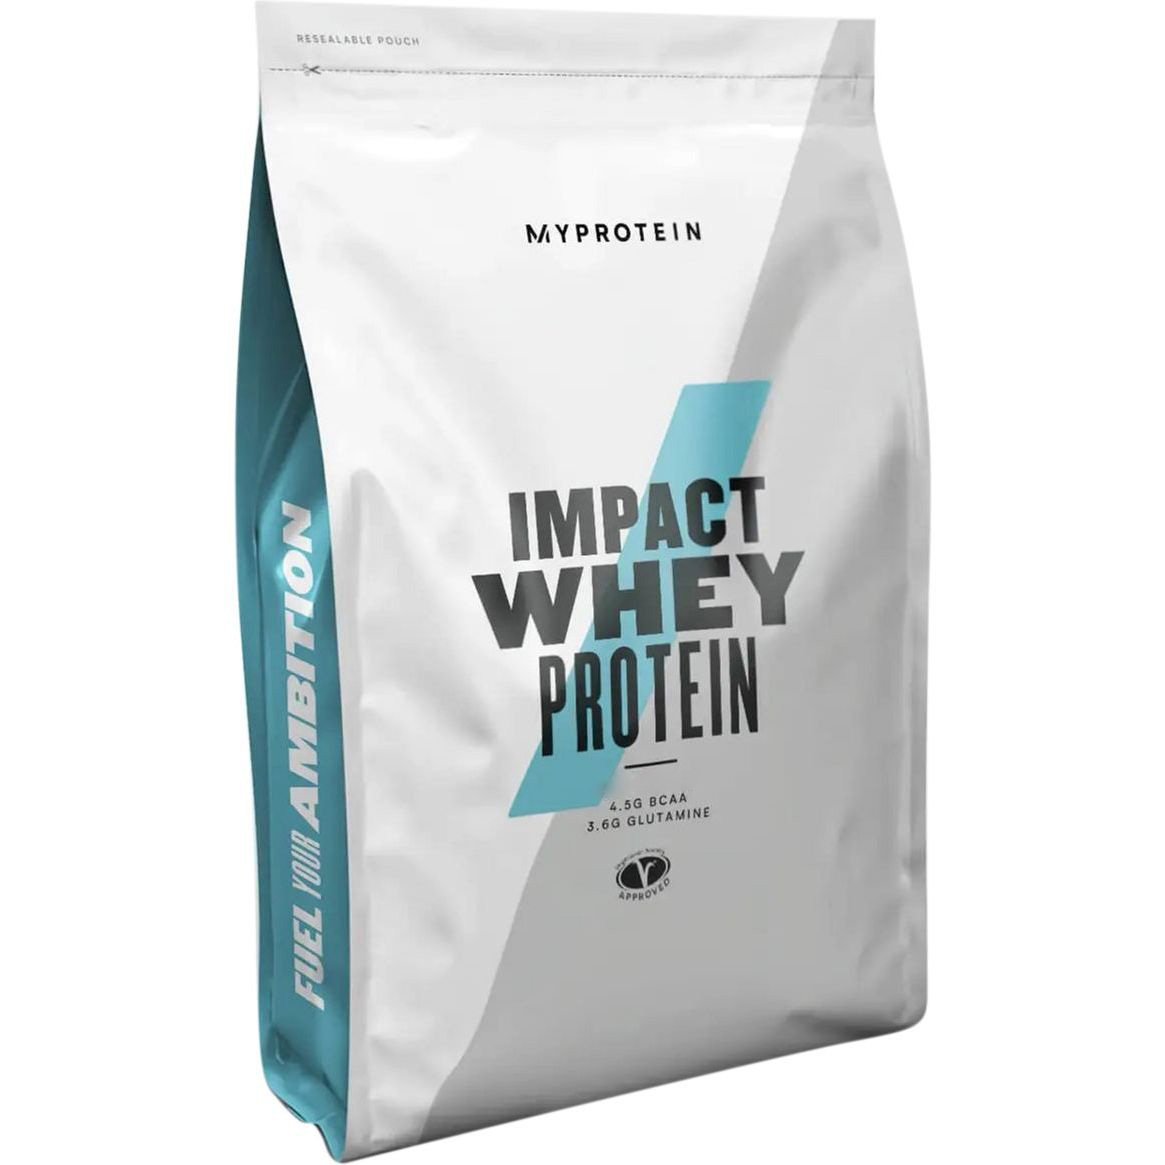 Протеин Myprotein Impact Whey Protein Natural Strawberry 2.5 кг кг - фото 1